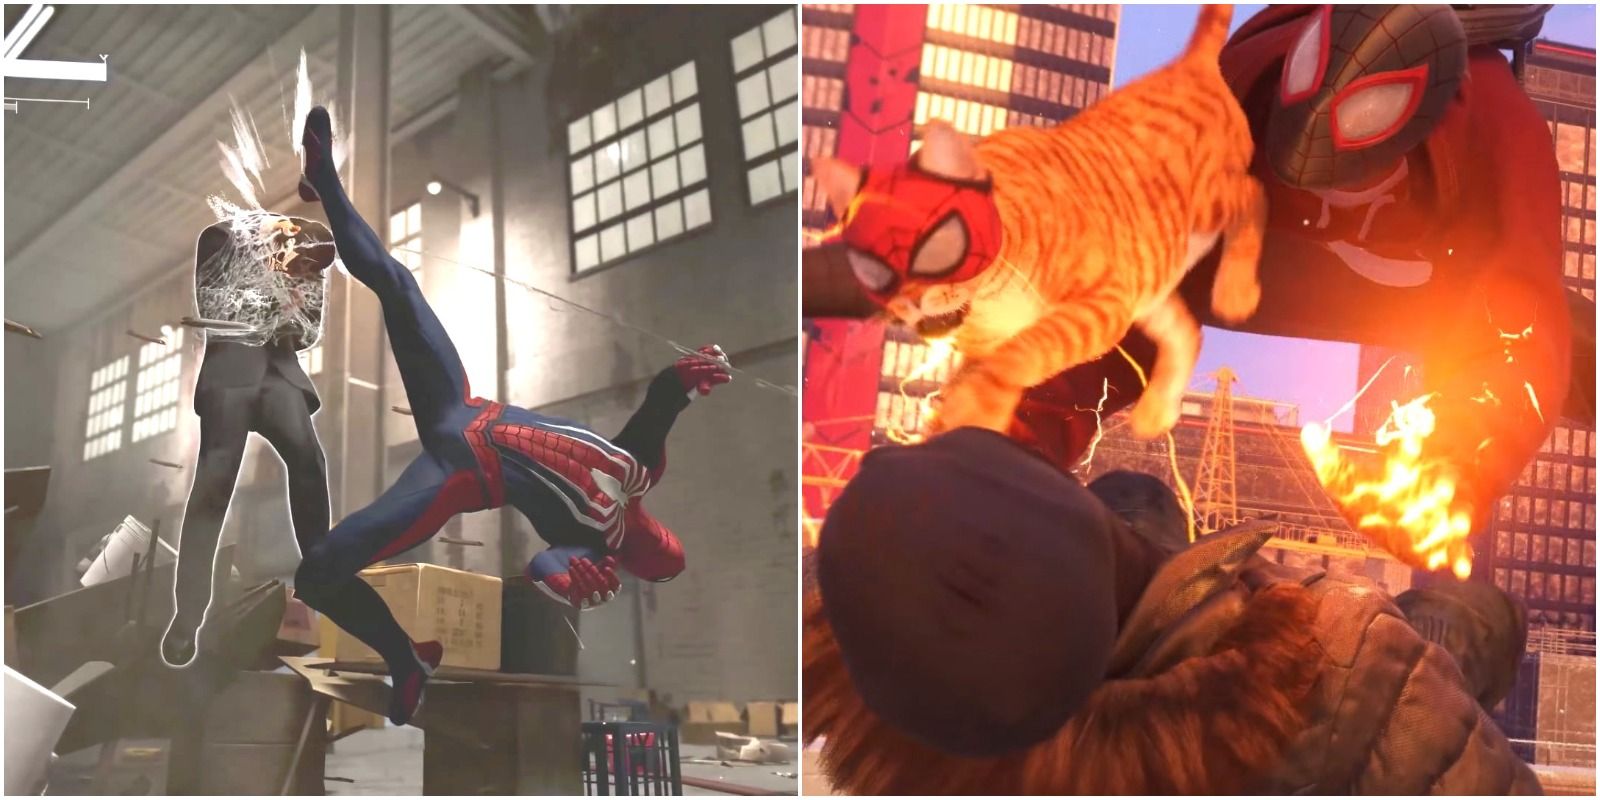 Spider-Man performing a combo from Marvel's Spider-Man